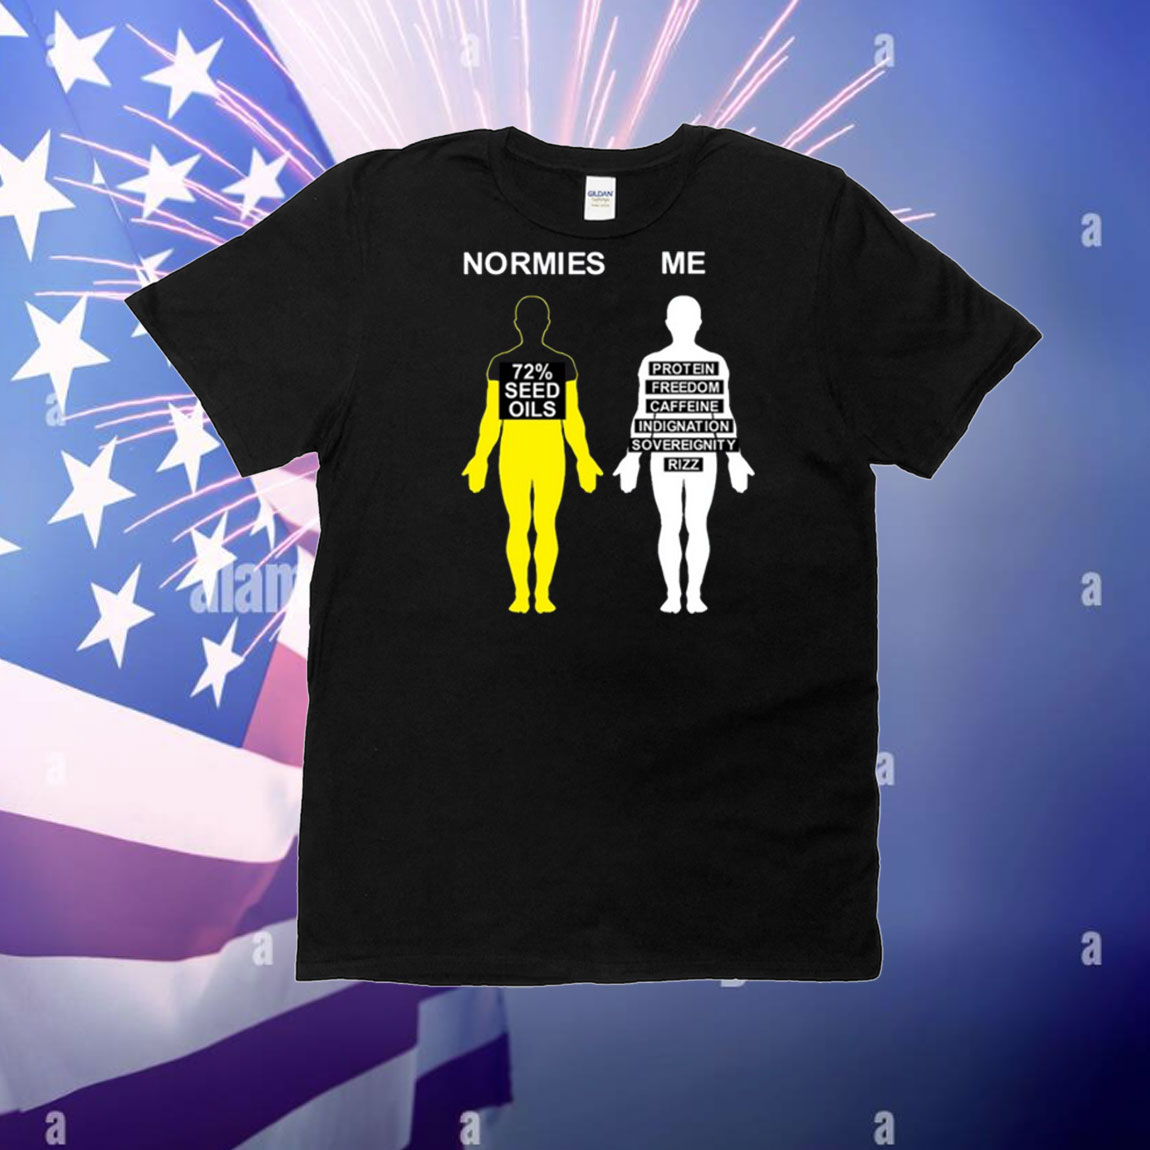 Normies Vs Me 72 Seed Oils T-Shirt